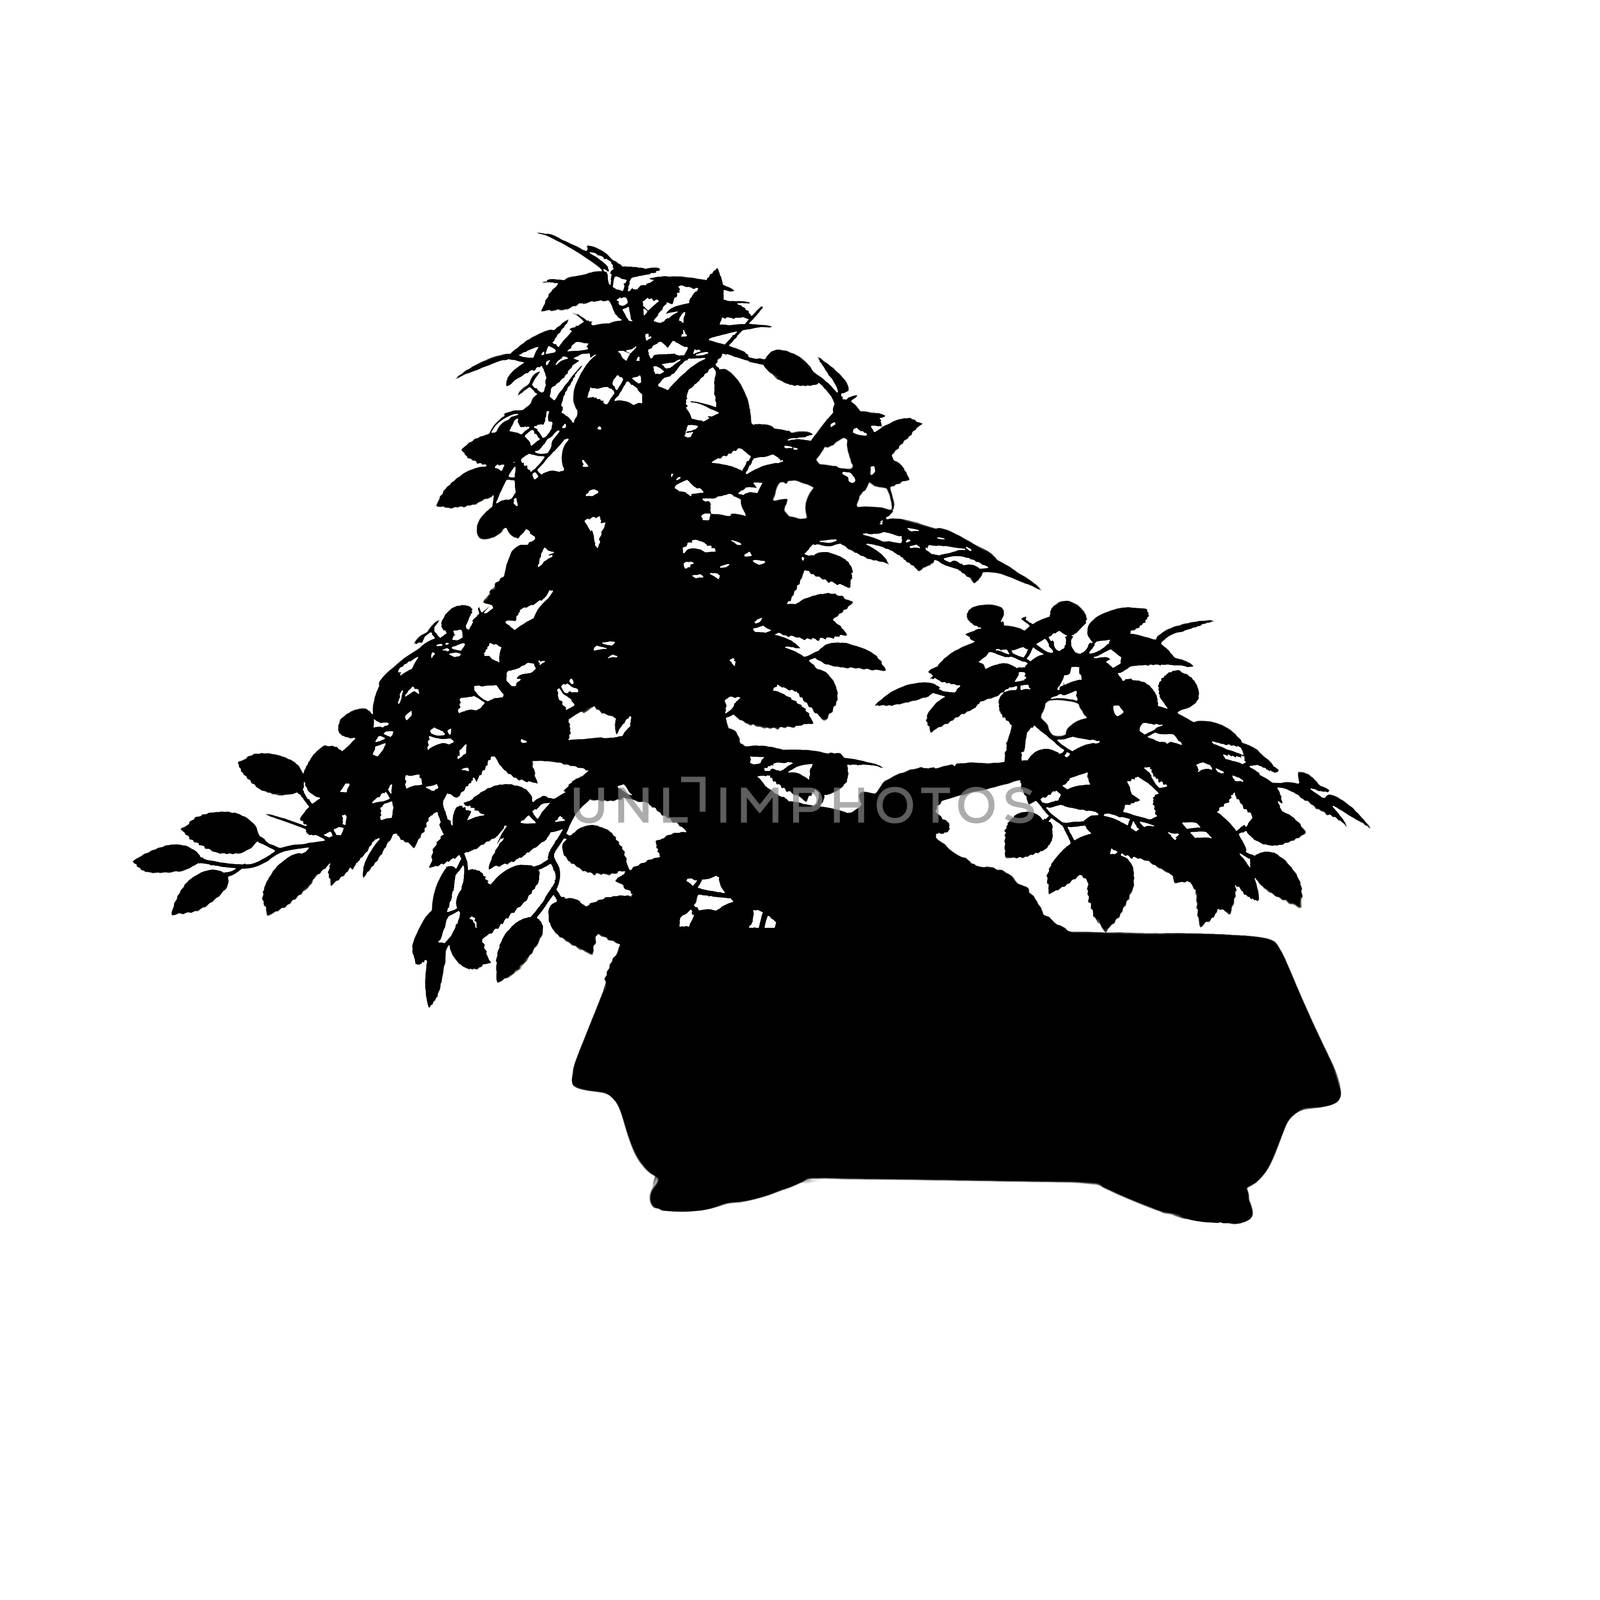 Bonsai silhouette tree isolated on a white background by 977_ReX_977